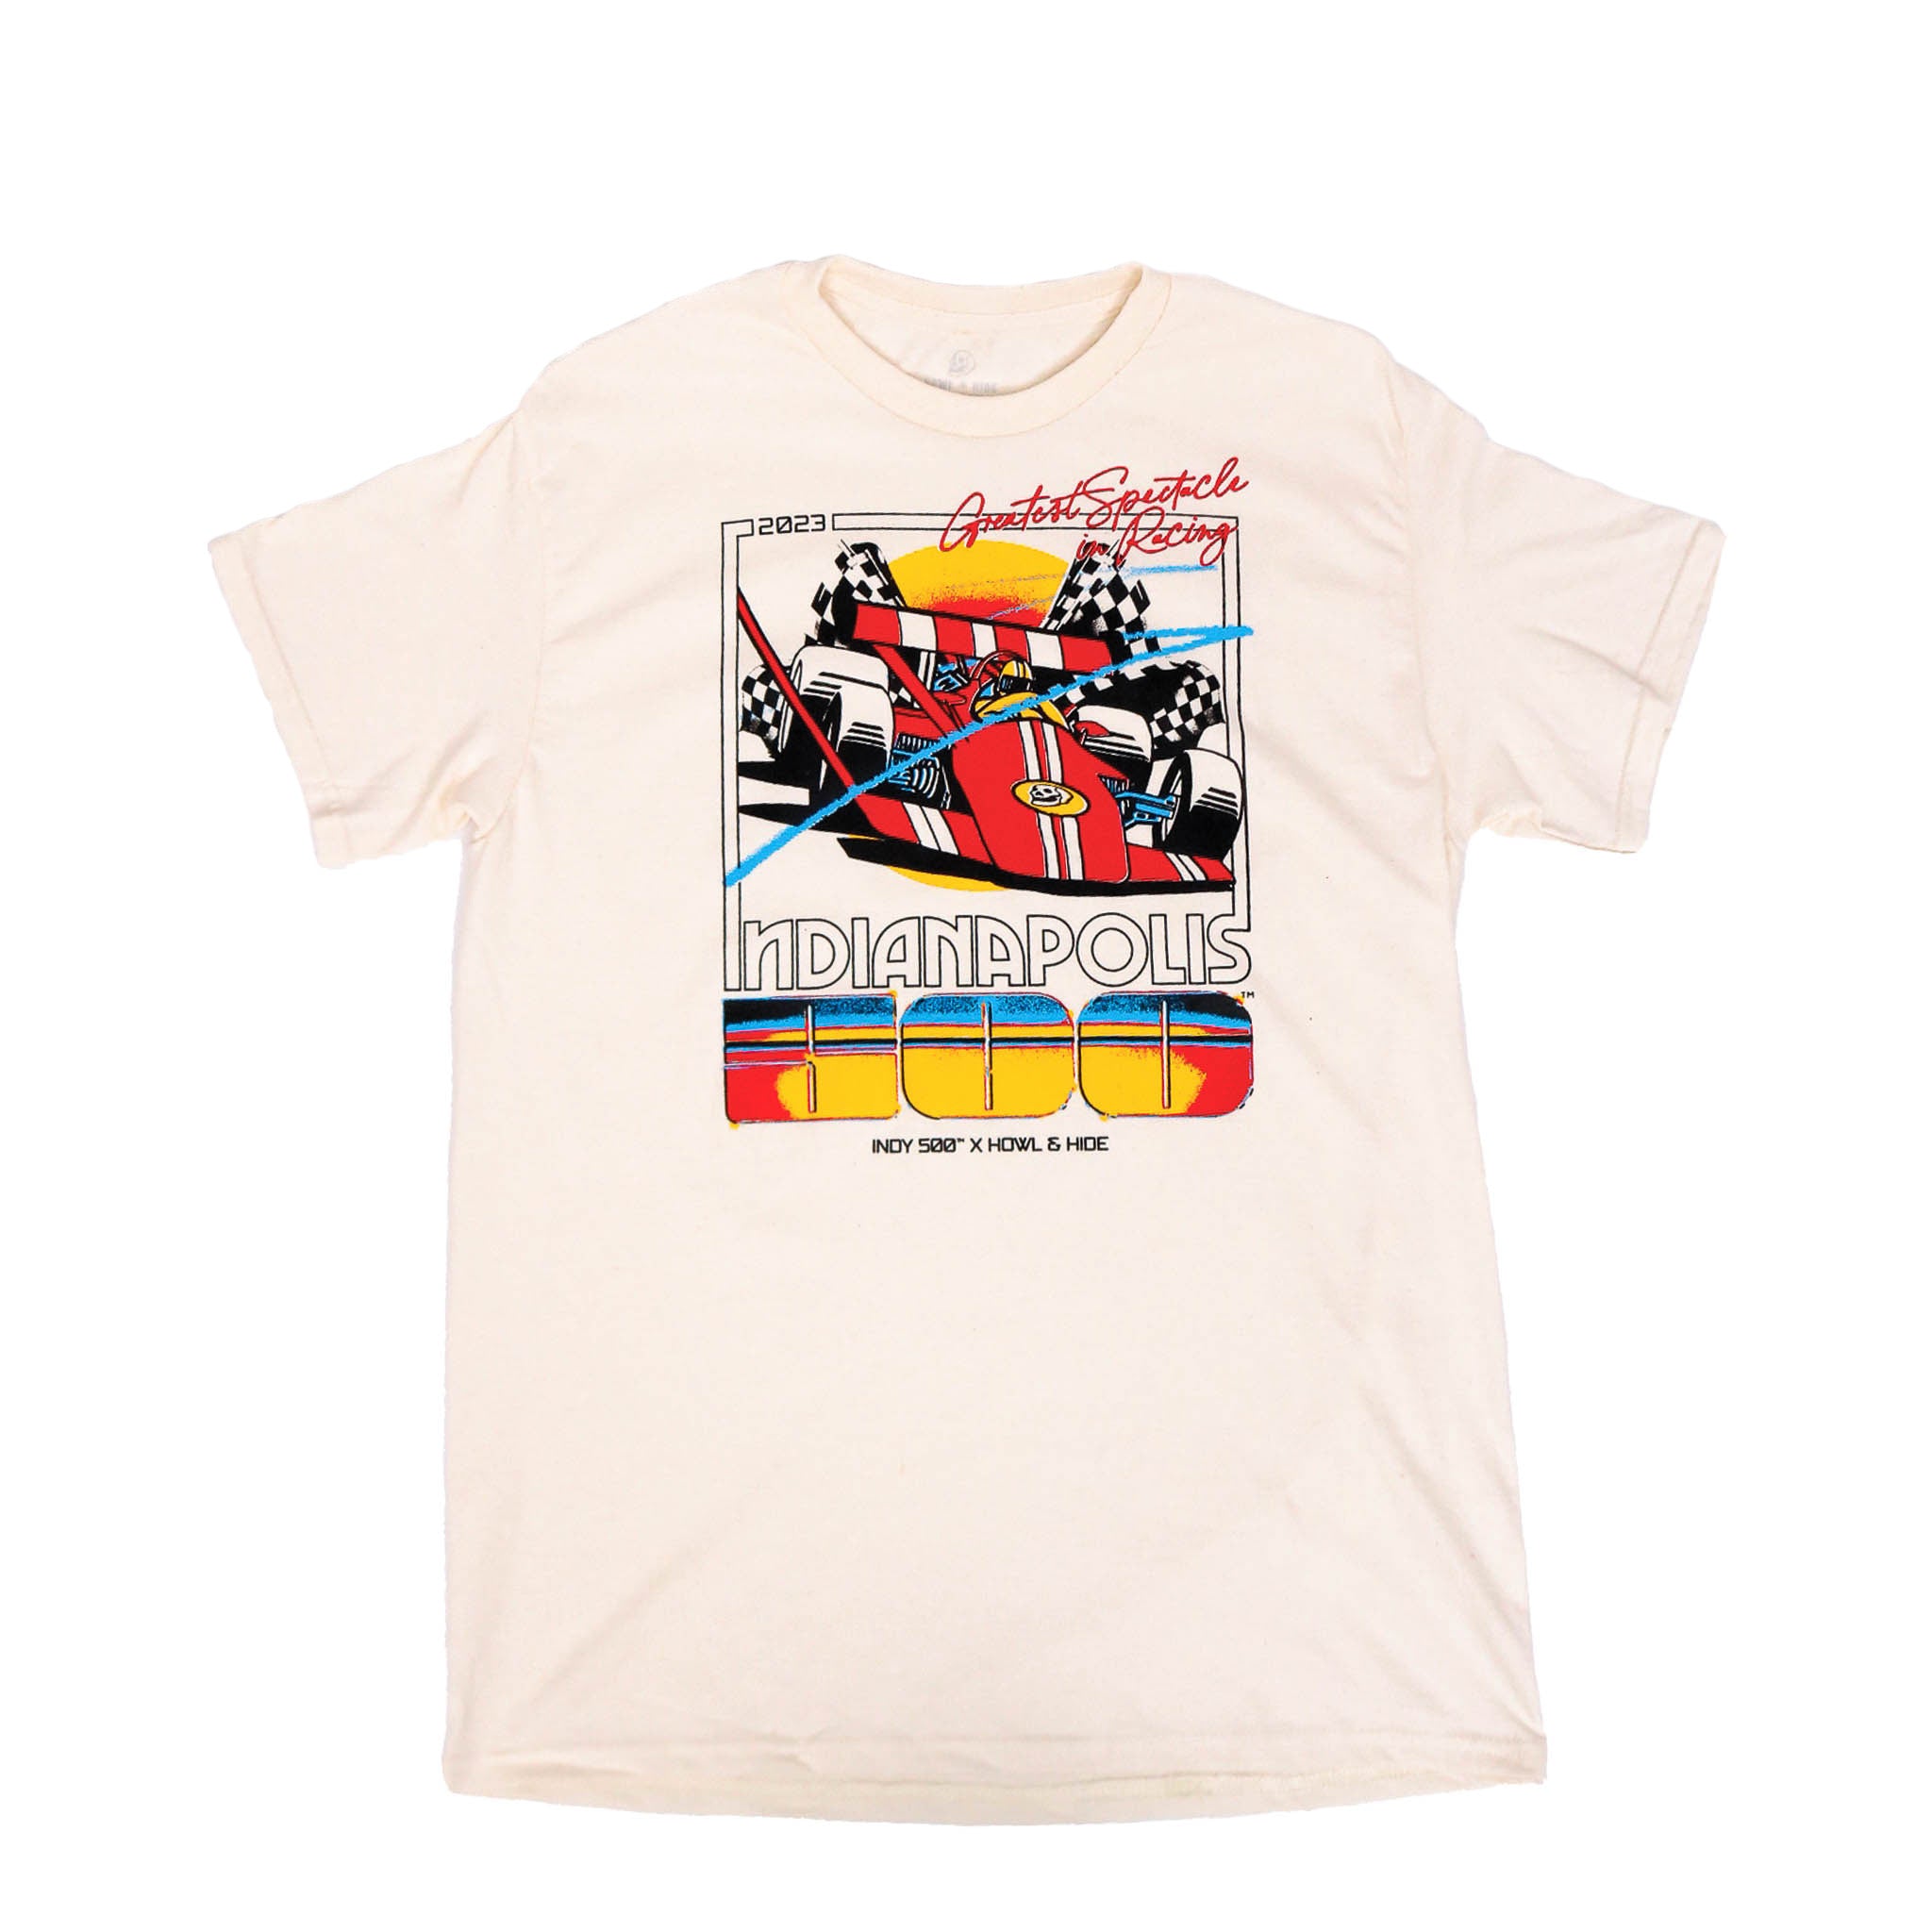 Greatest Spectacle in Racing Tee - IMS